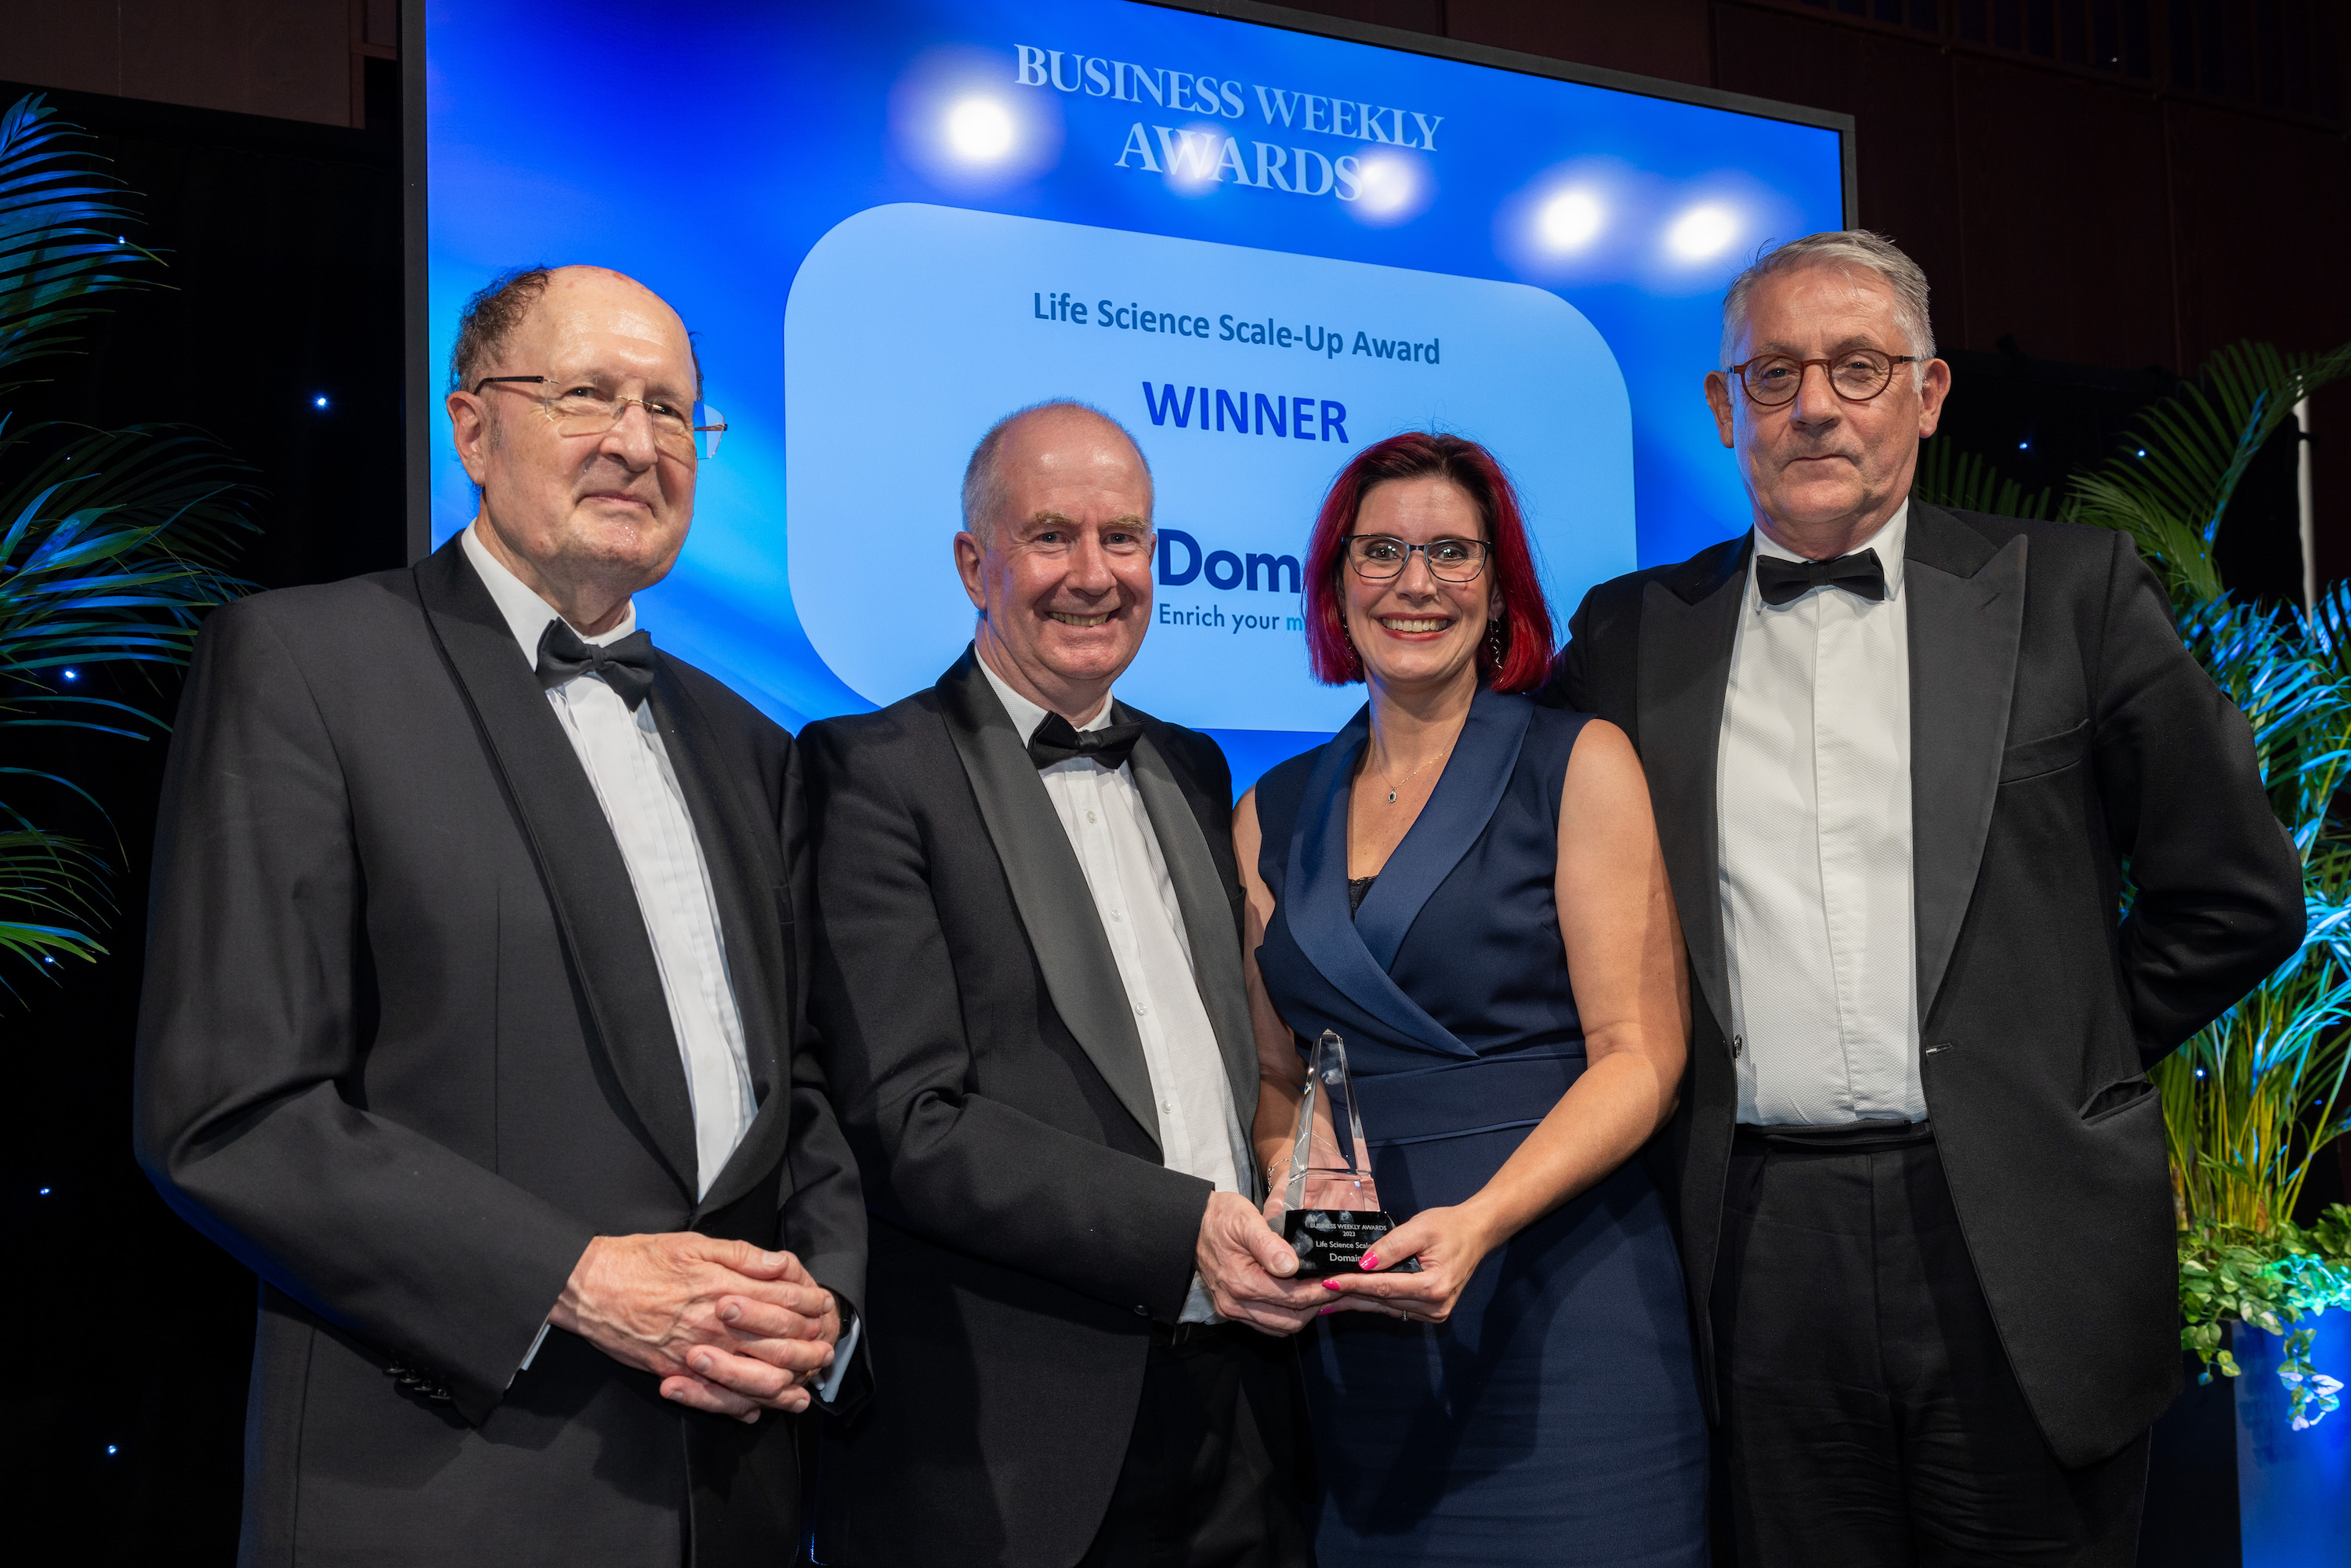 Domainex receiving the Life Science Scale-Up Award at the Business Weekly Awards (photo credited to David Johnson https://davidjohnsonphotographic.myportfolio.com